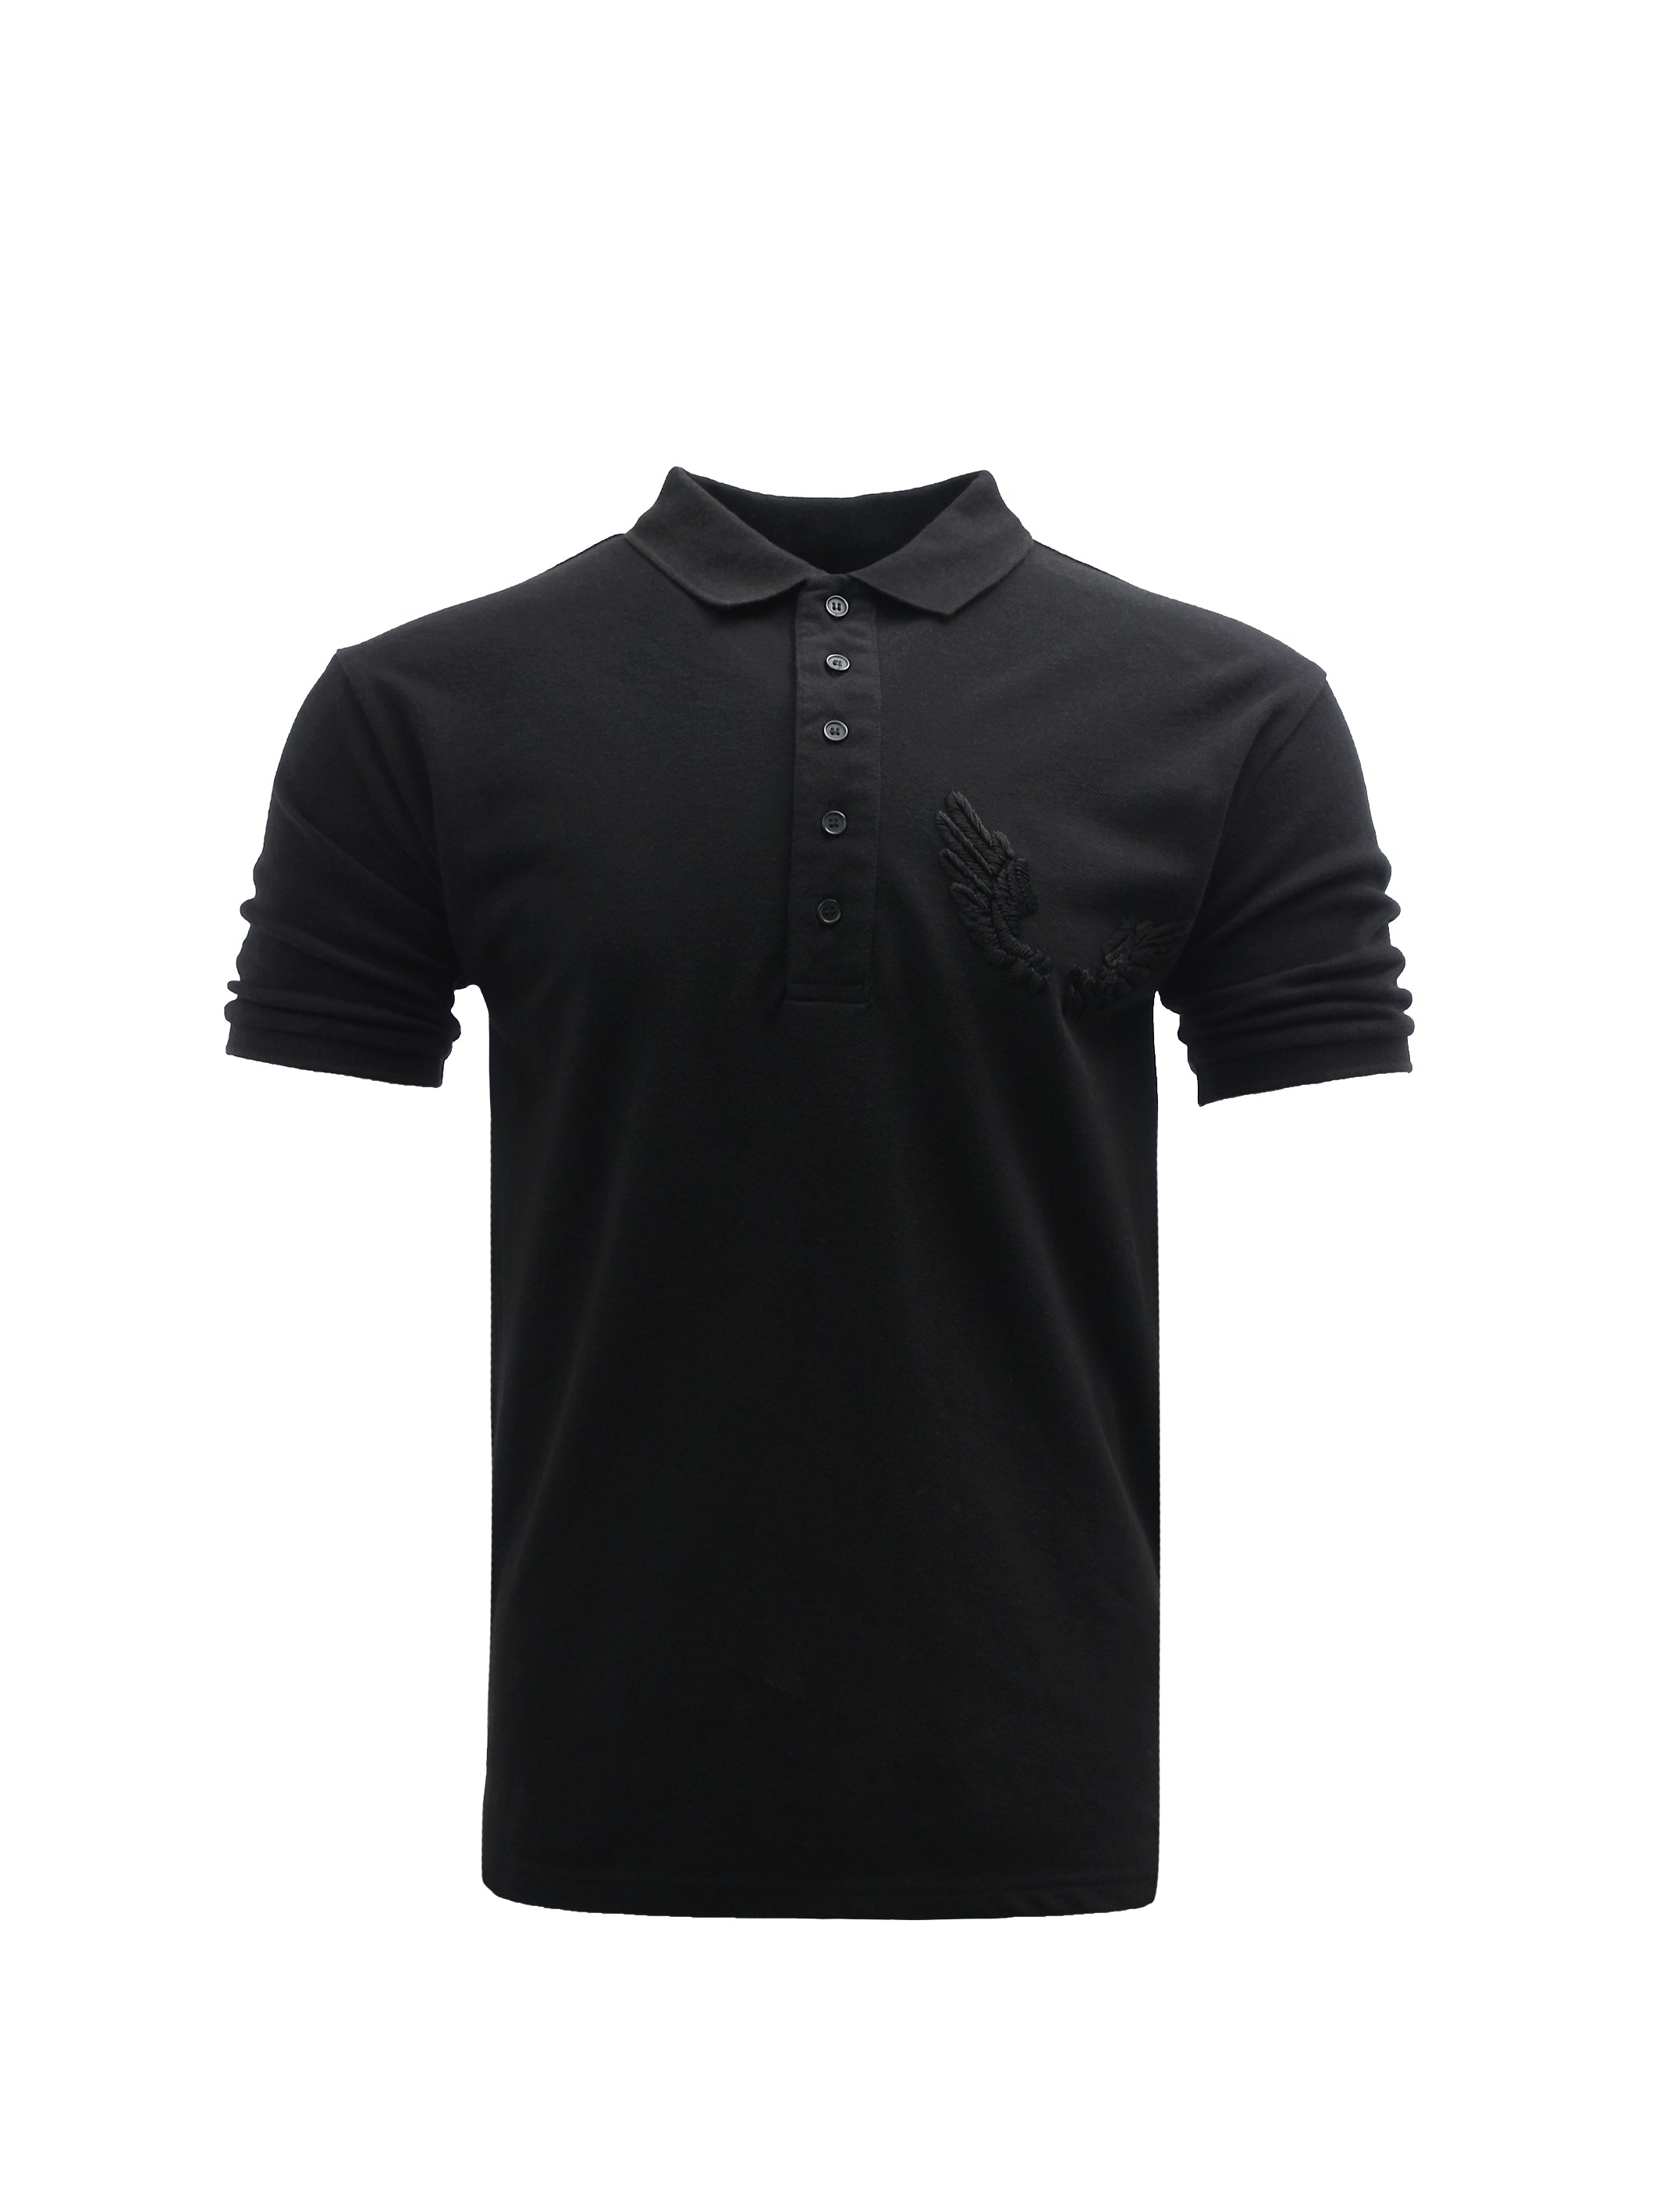 BLACK EMBROIDERED WINGS POLO TOP